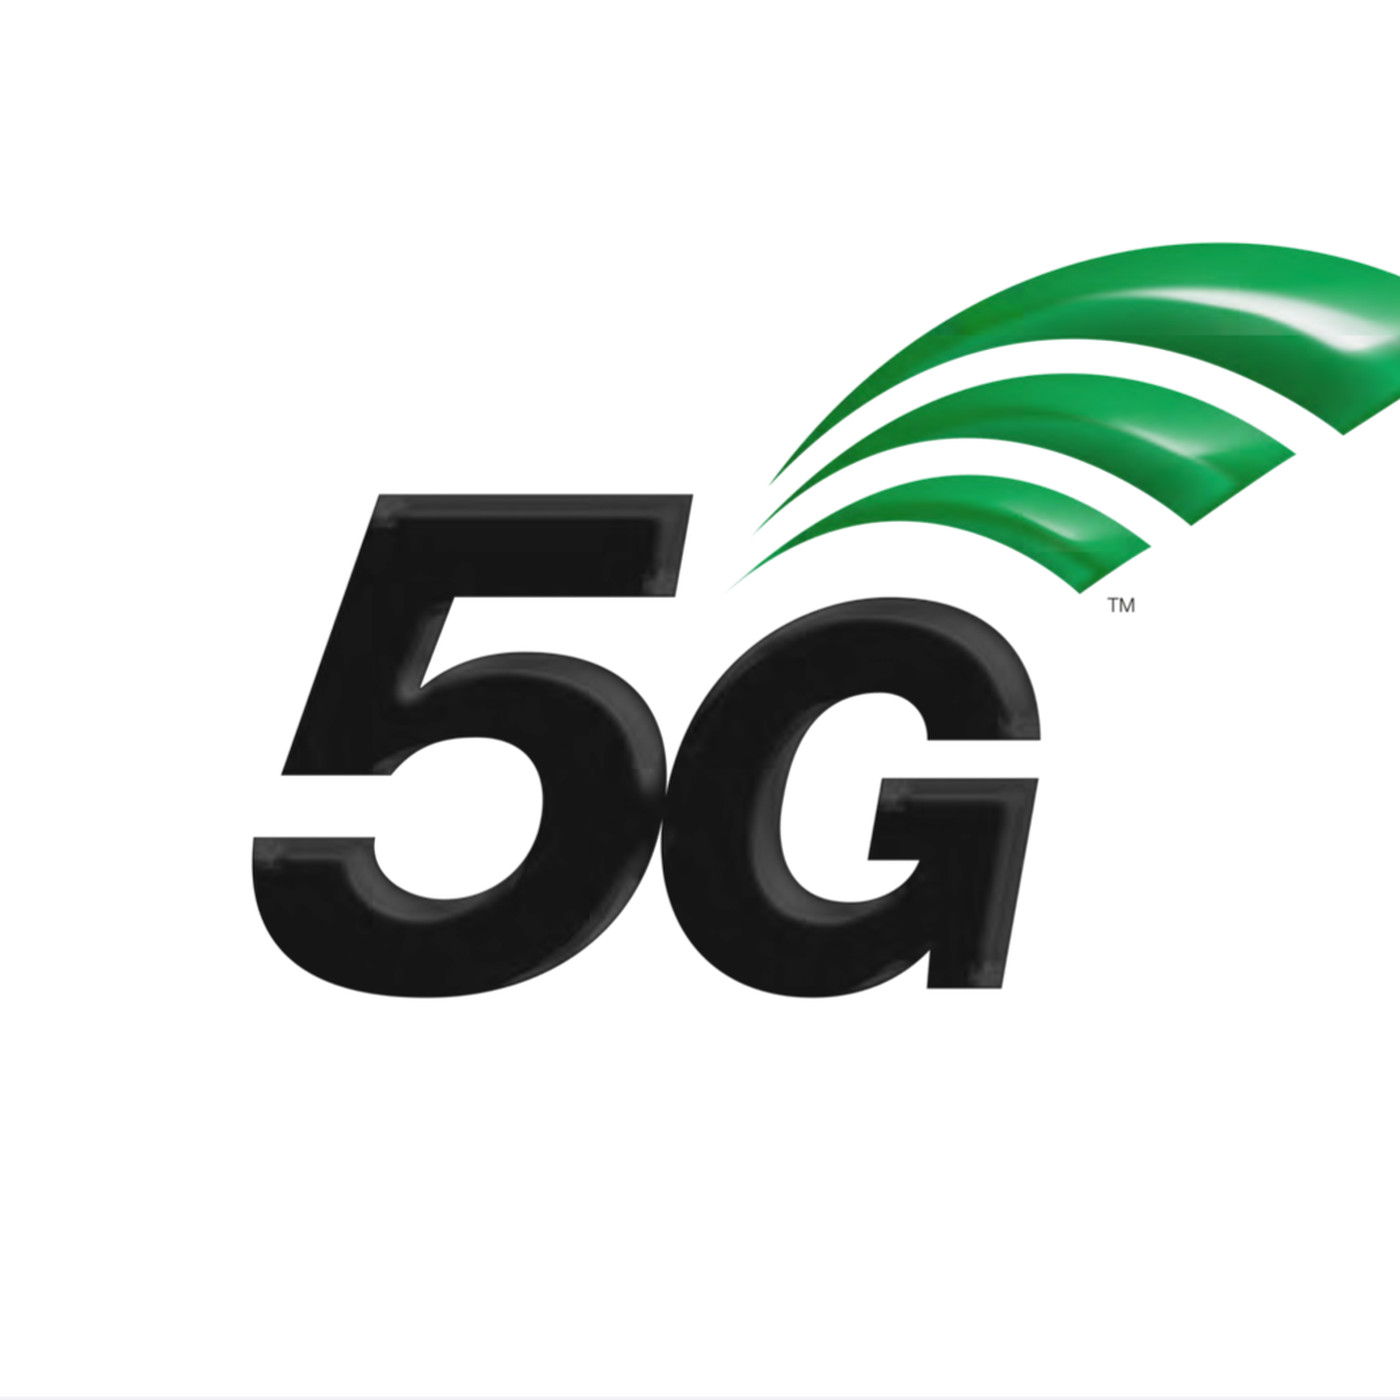 MEDIA BRIEFING DOCUMENT - Small Cells: Key Driver in Effective 5G Rollout